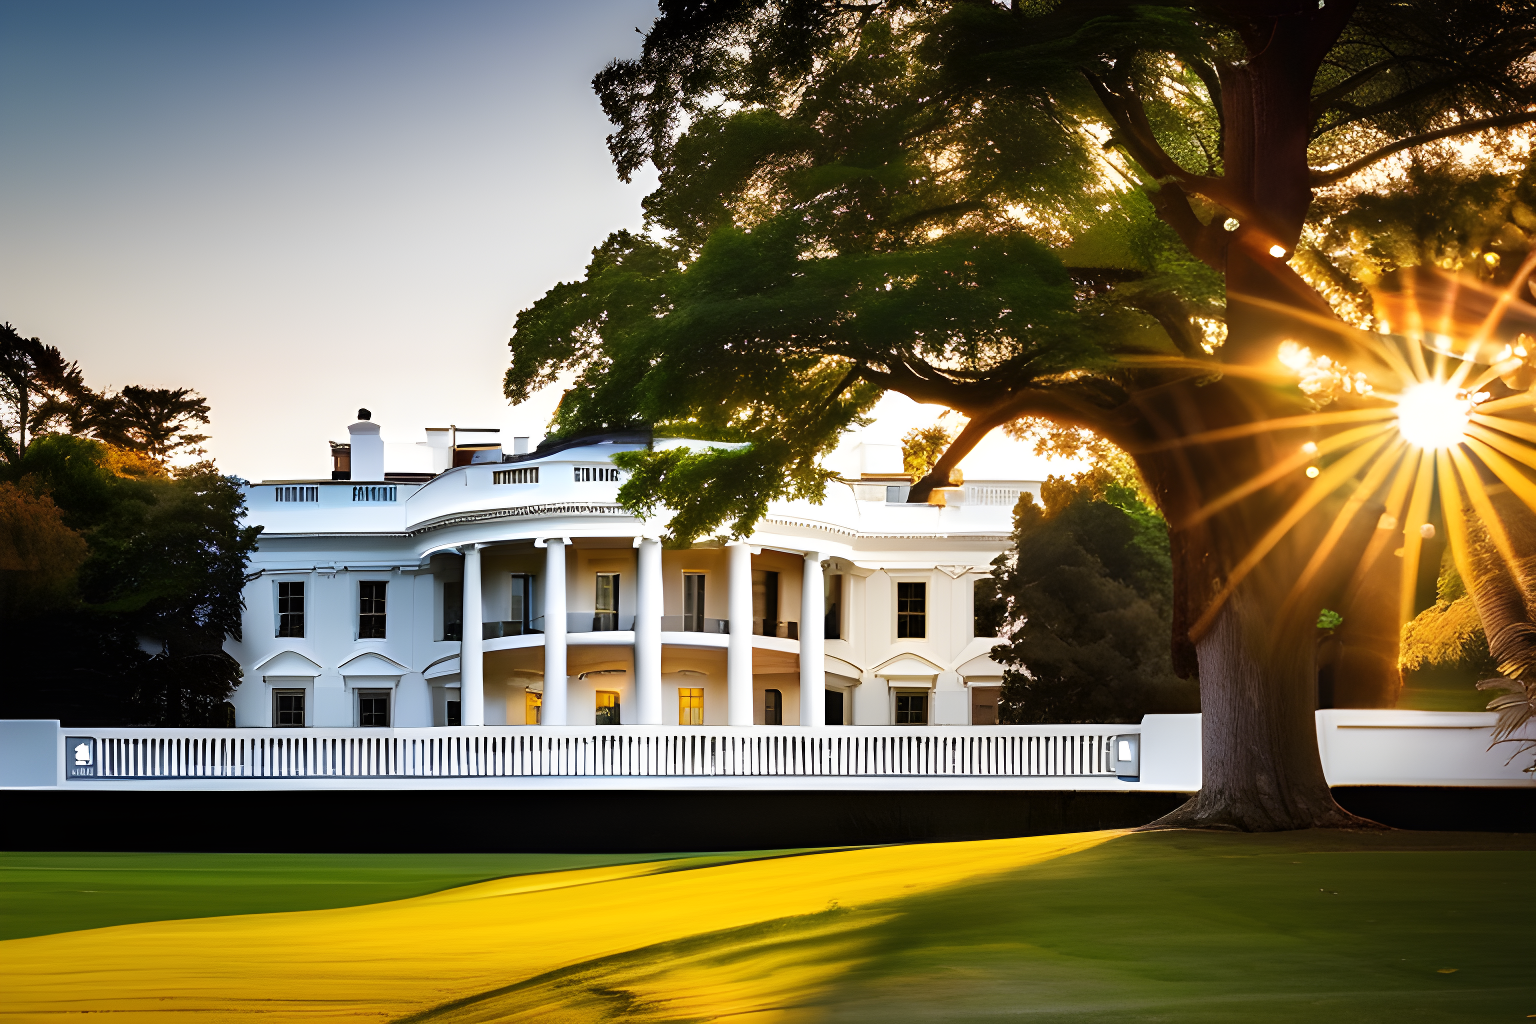 The White House in a picturesque way